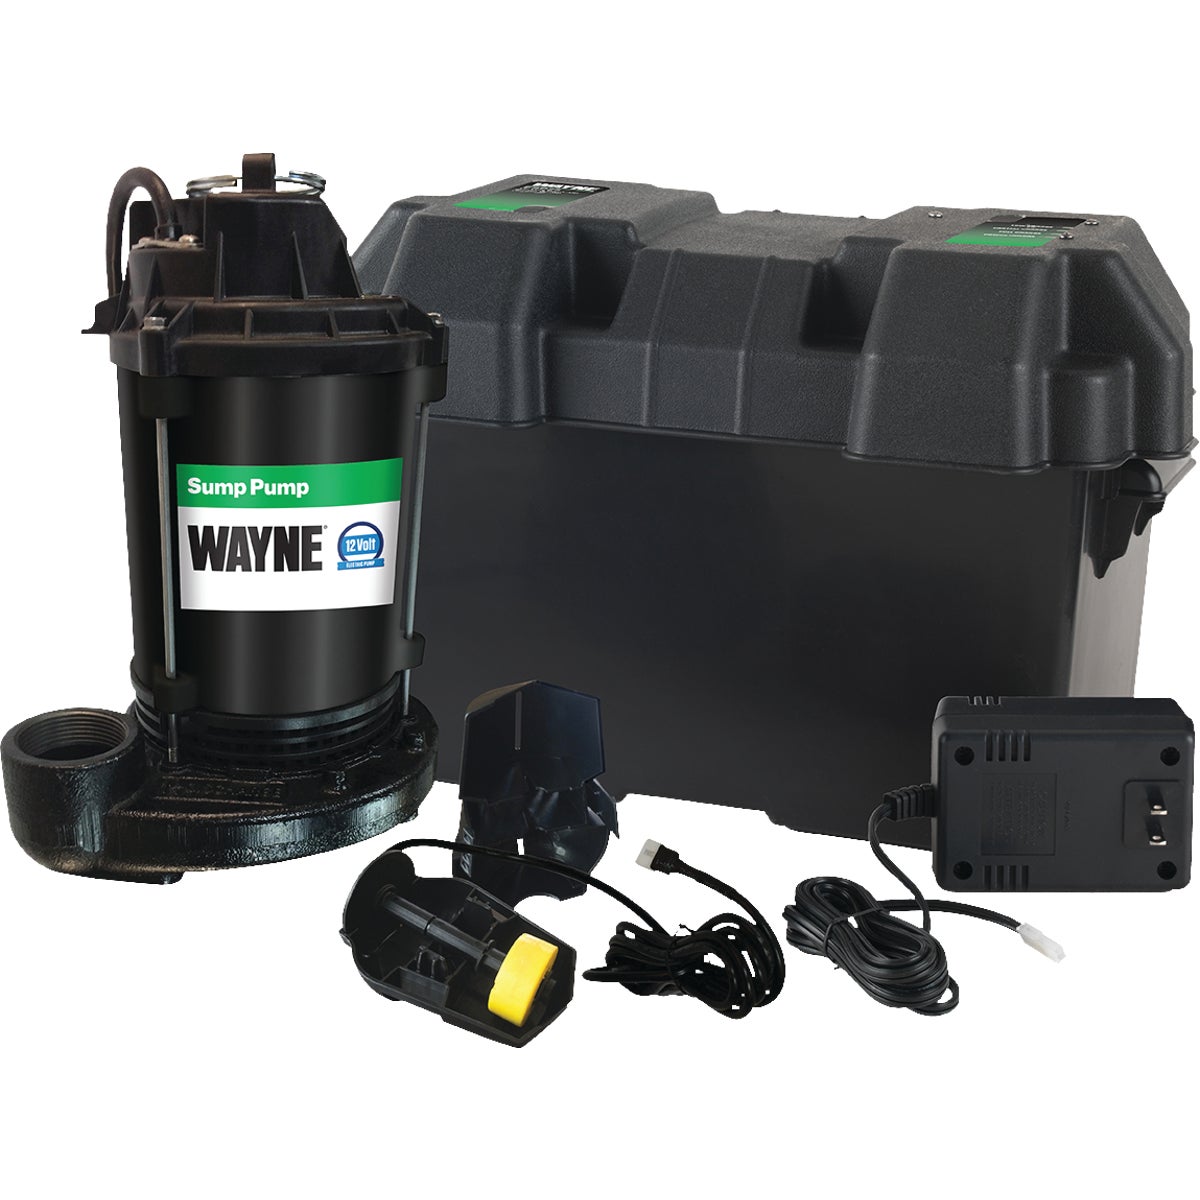 Item 417498, Fully submersible back up pump for an easy addition to any sump system.